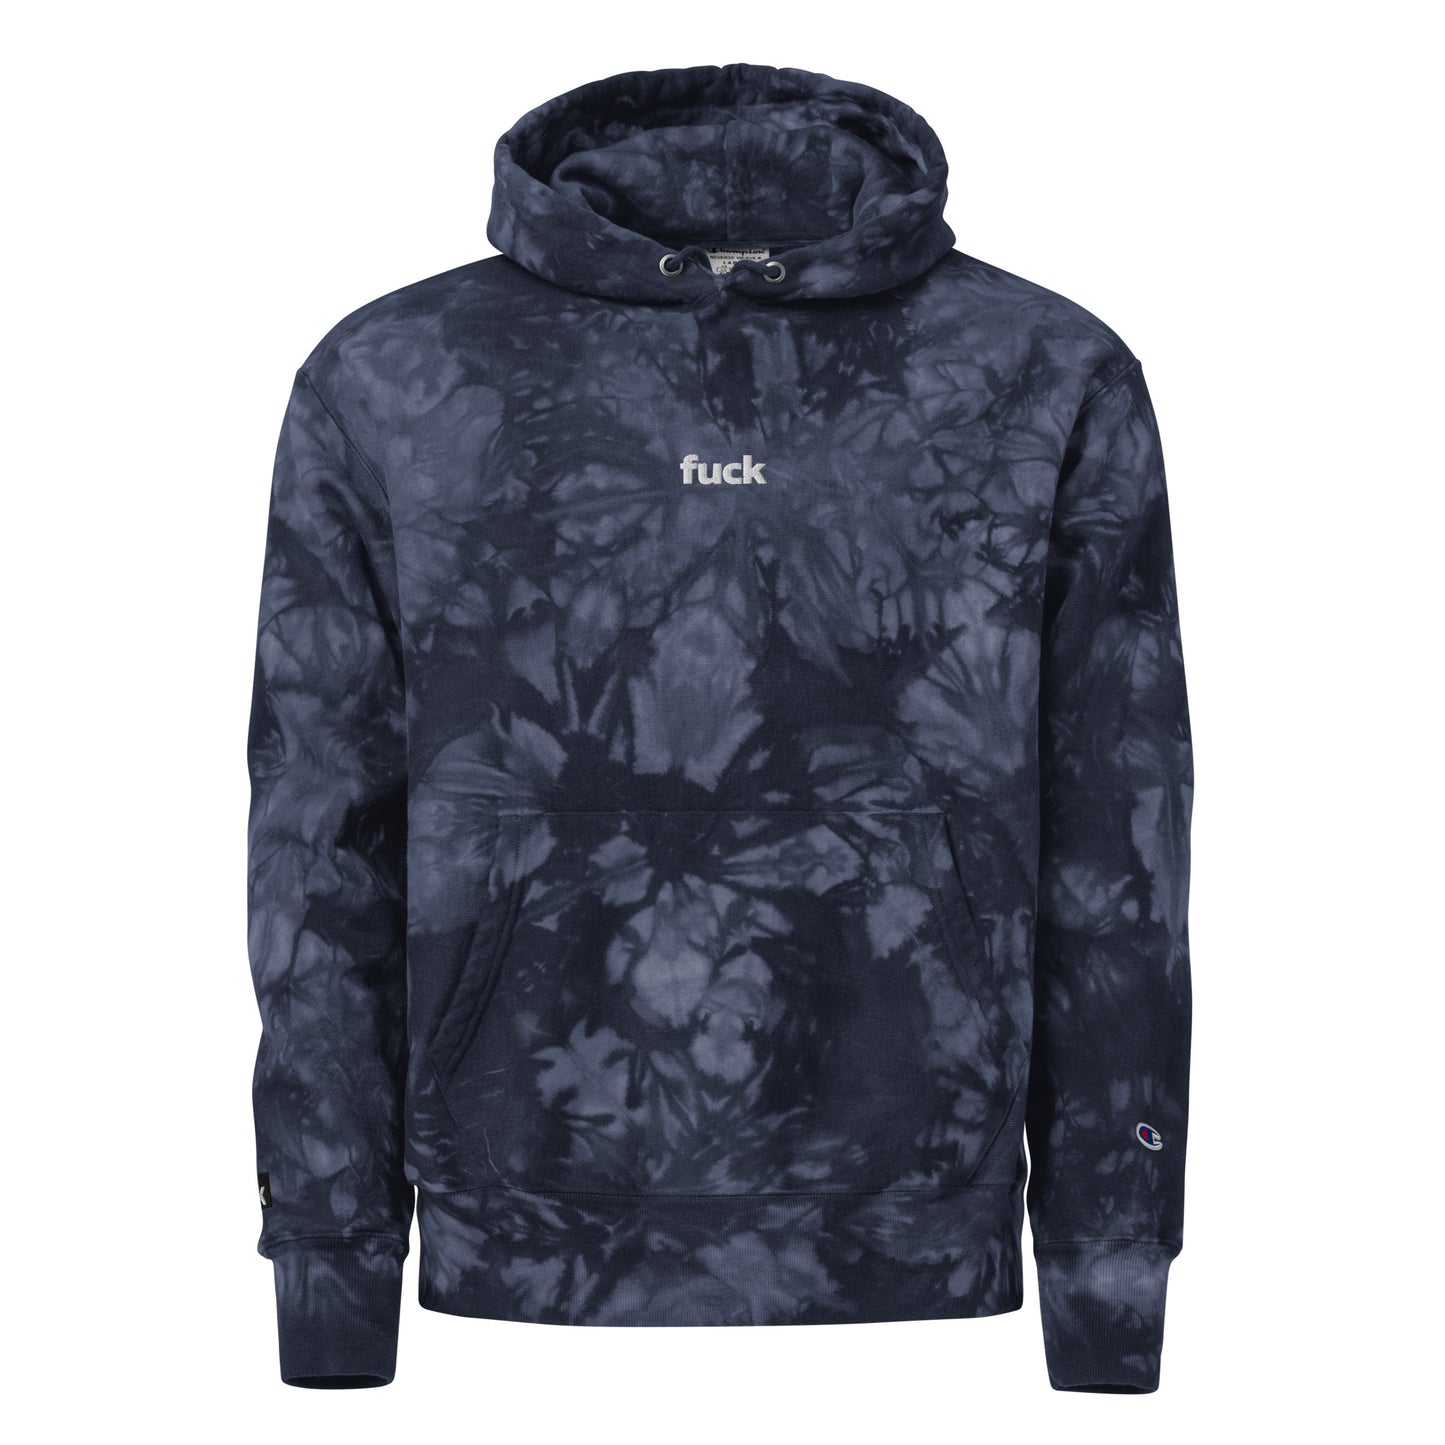 fuck embroidered tie dye hoodie